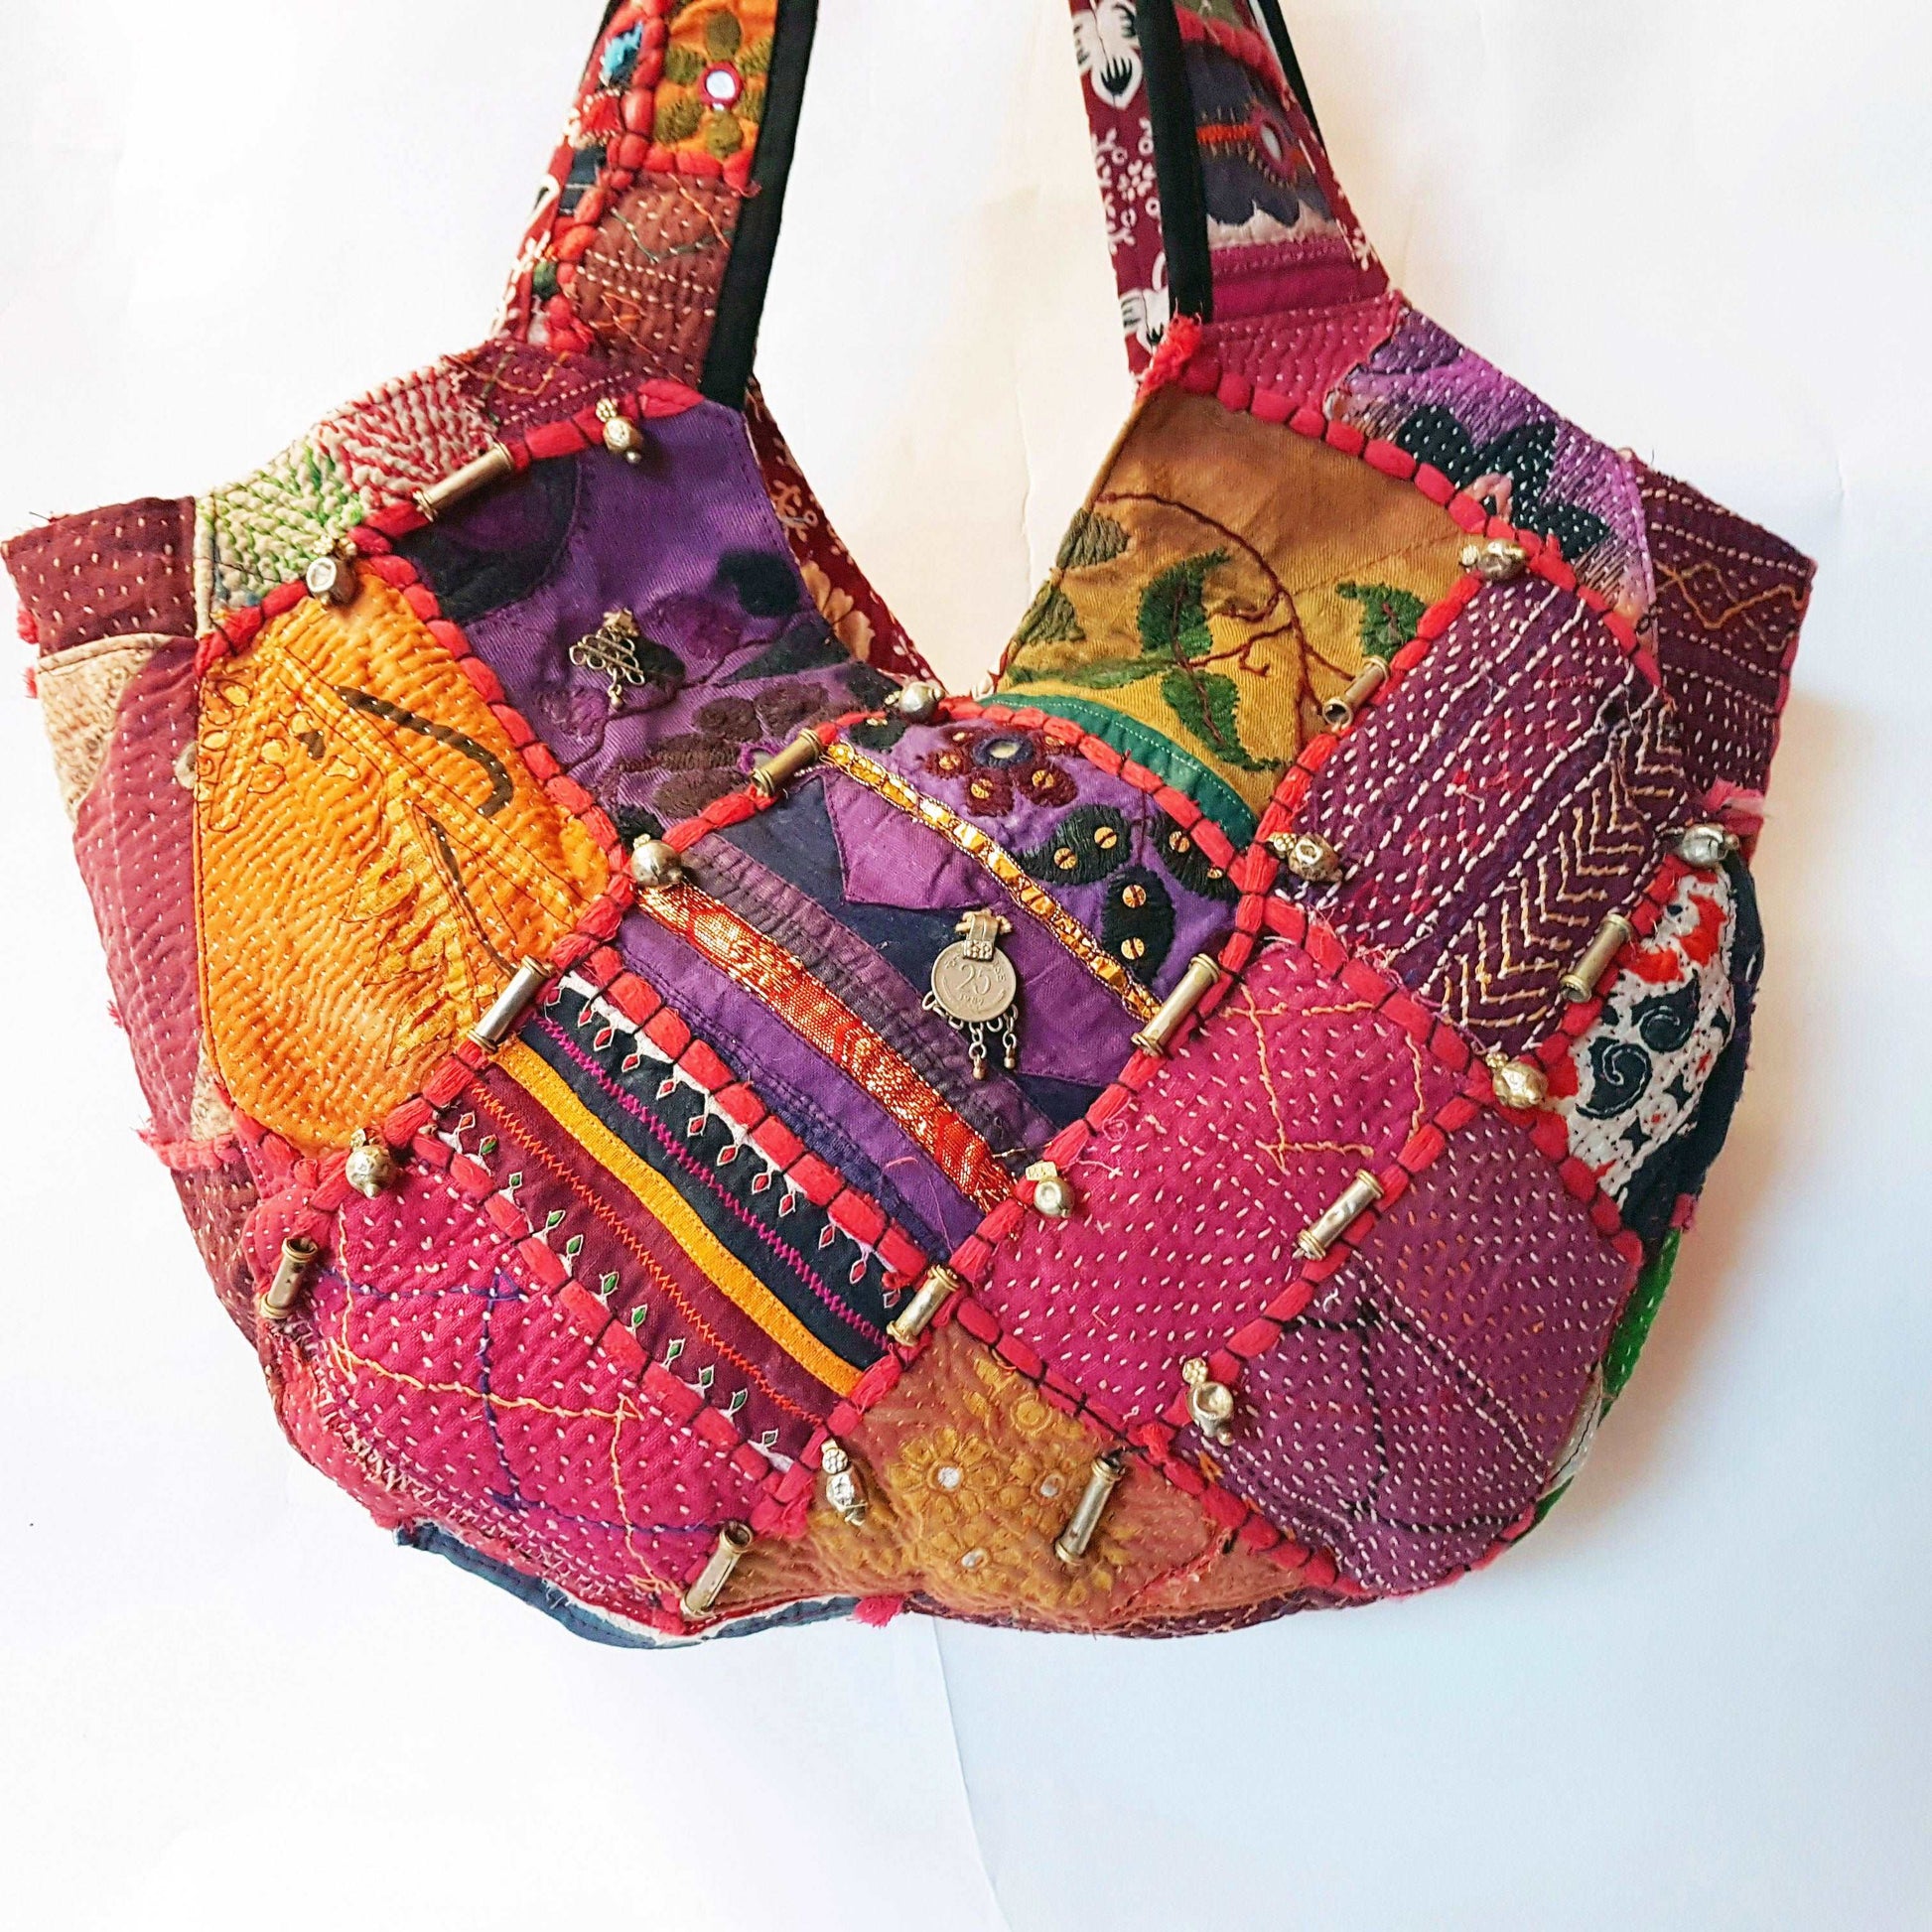 Banjara shoulder bag. Authentic vintage tribal gypsy tote with silver bead ornaments & embroidered mirror work. One of a kind. Rare find.